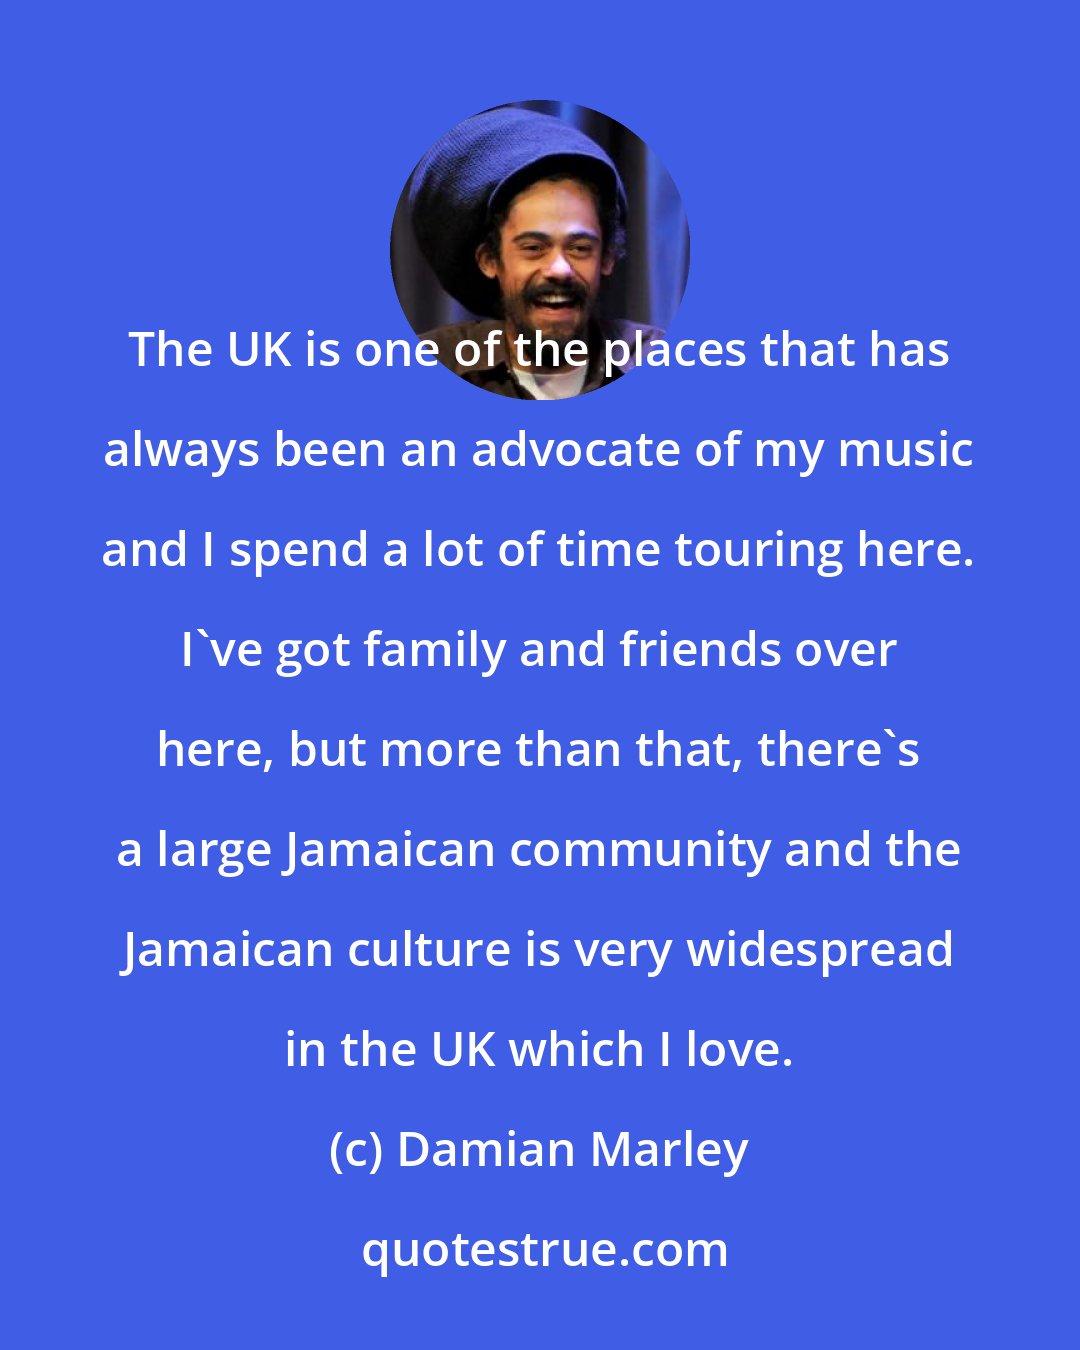 Damian Marley: The UK is one of the places that has always been an advocate of my music and I spend a lot of time touring here. I've got family and friends over here, but more than that, there's a large Jamaican community and the Jamaican culture is very widespread in the UK which I love.